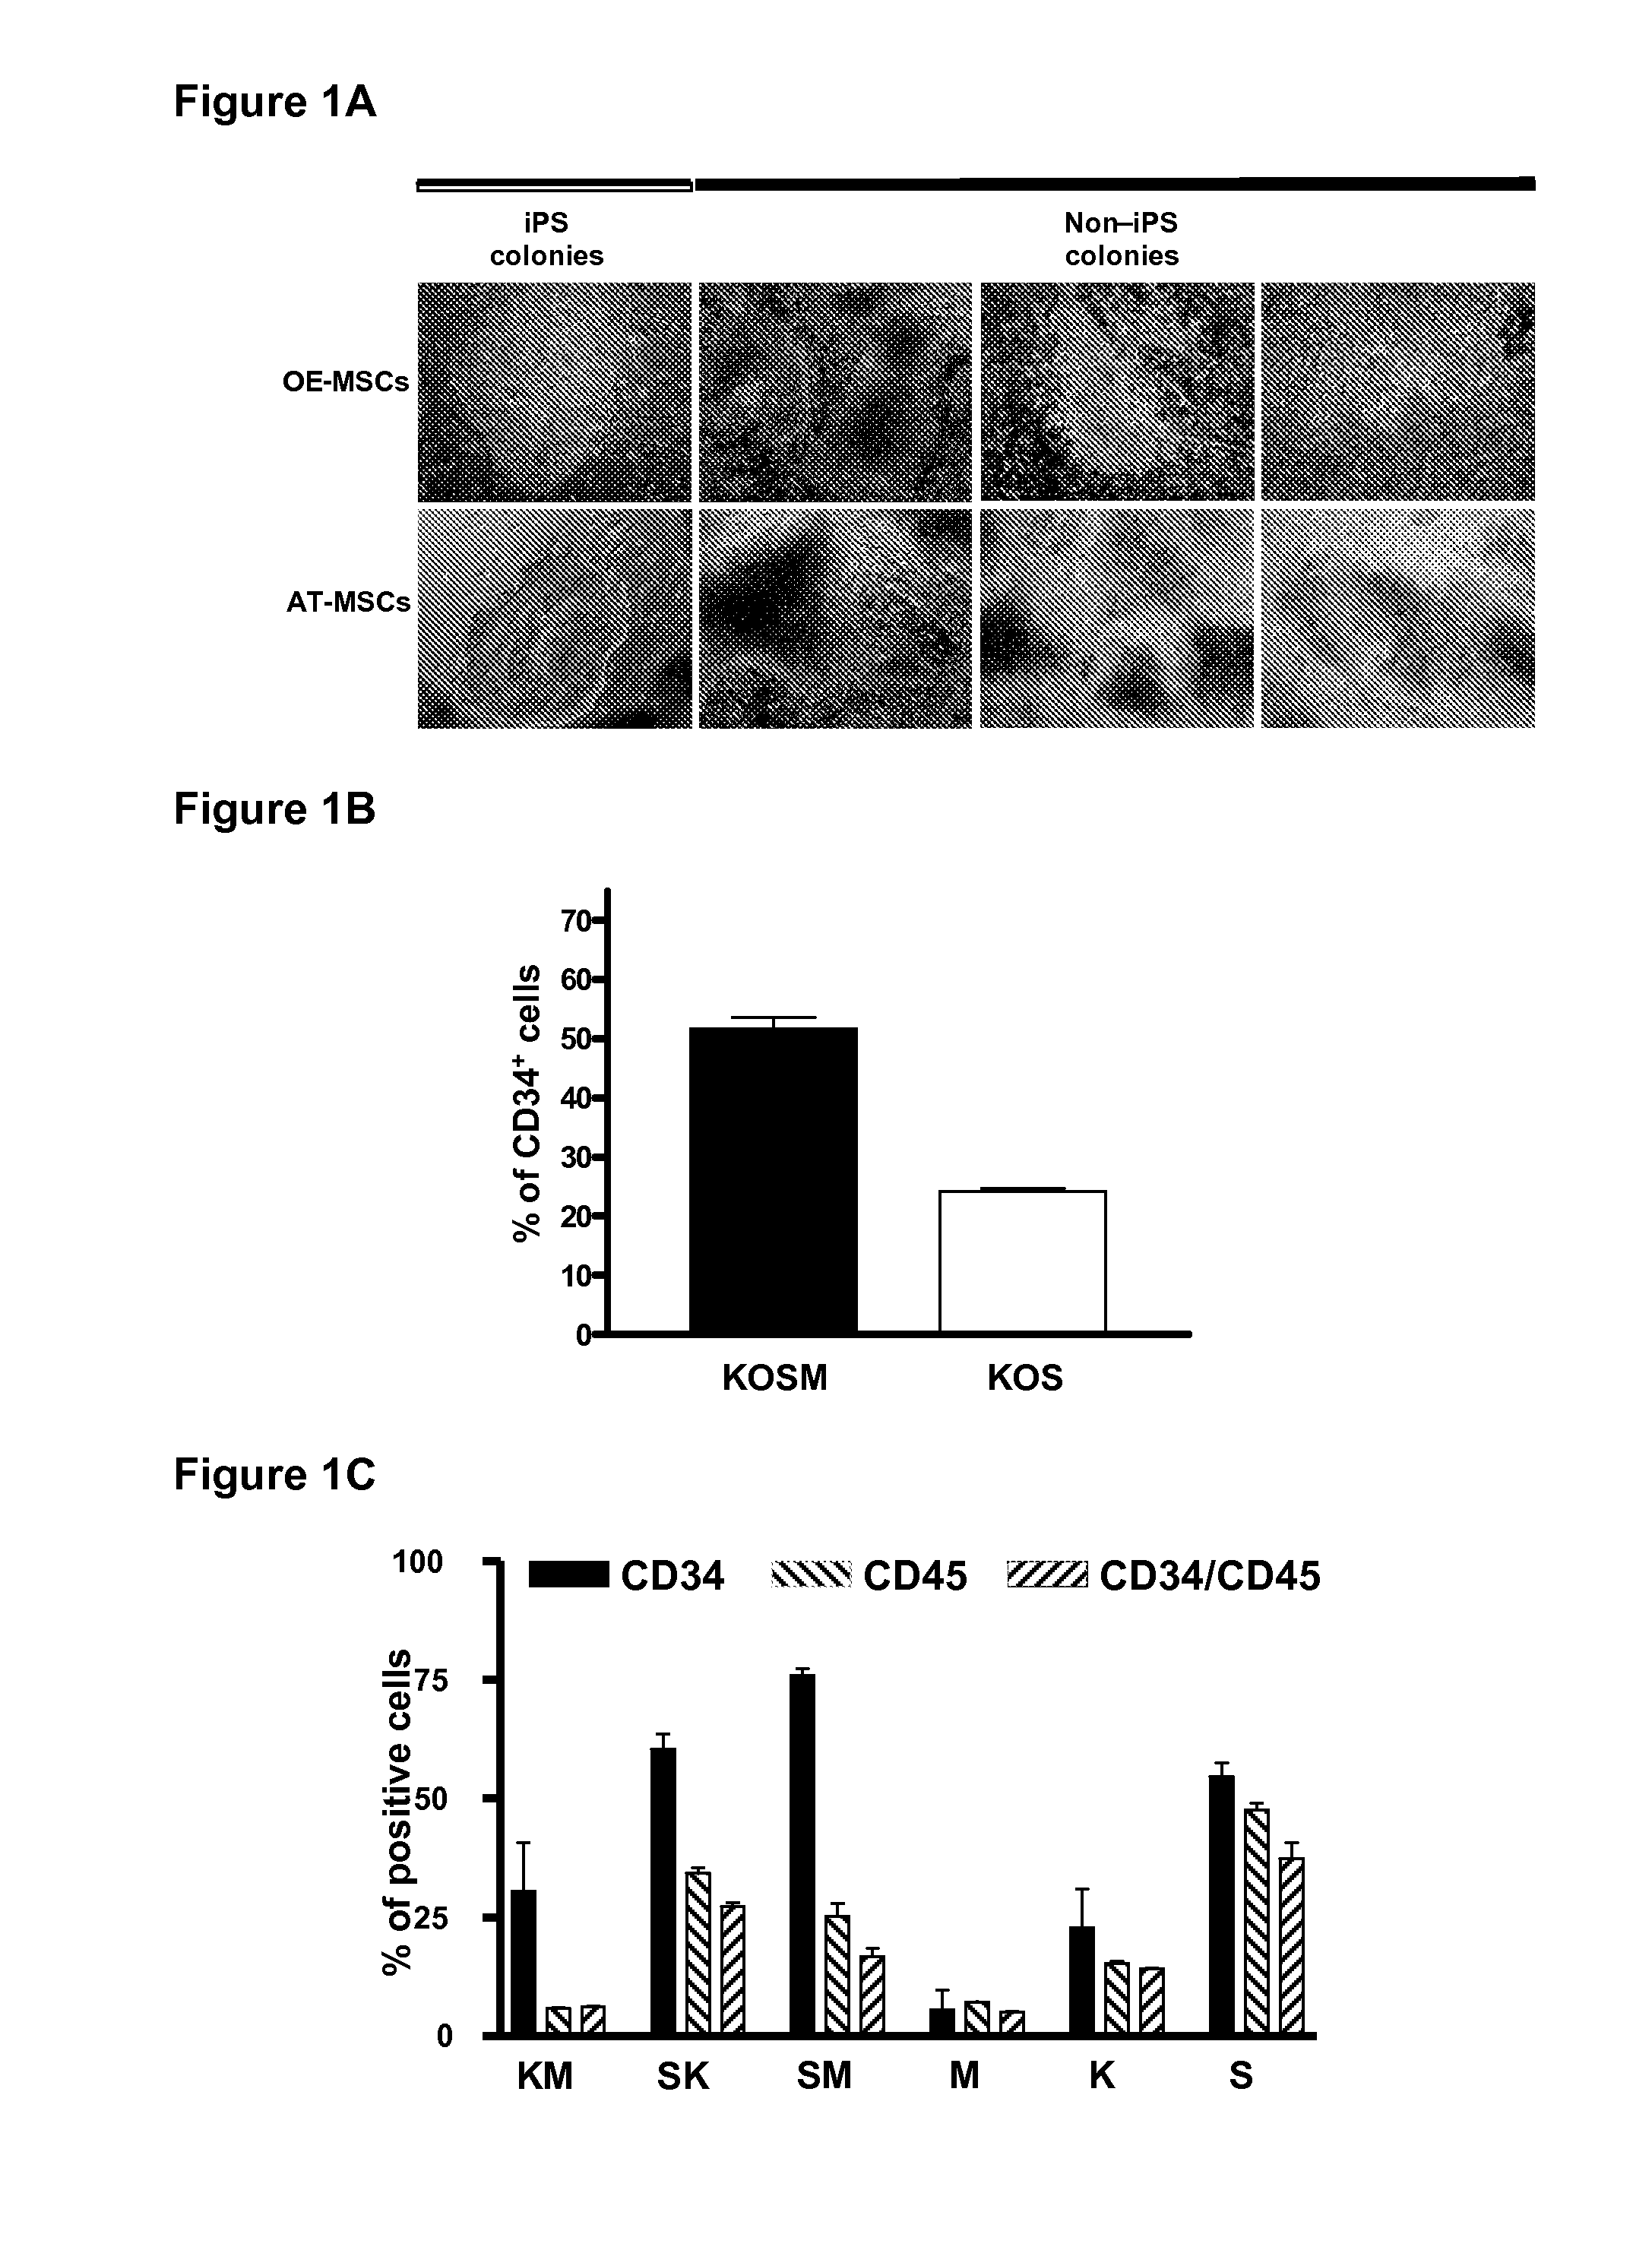 Formation of hematopoietic progenitor cells from mesenchymal stem cells